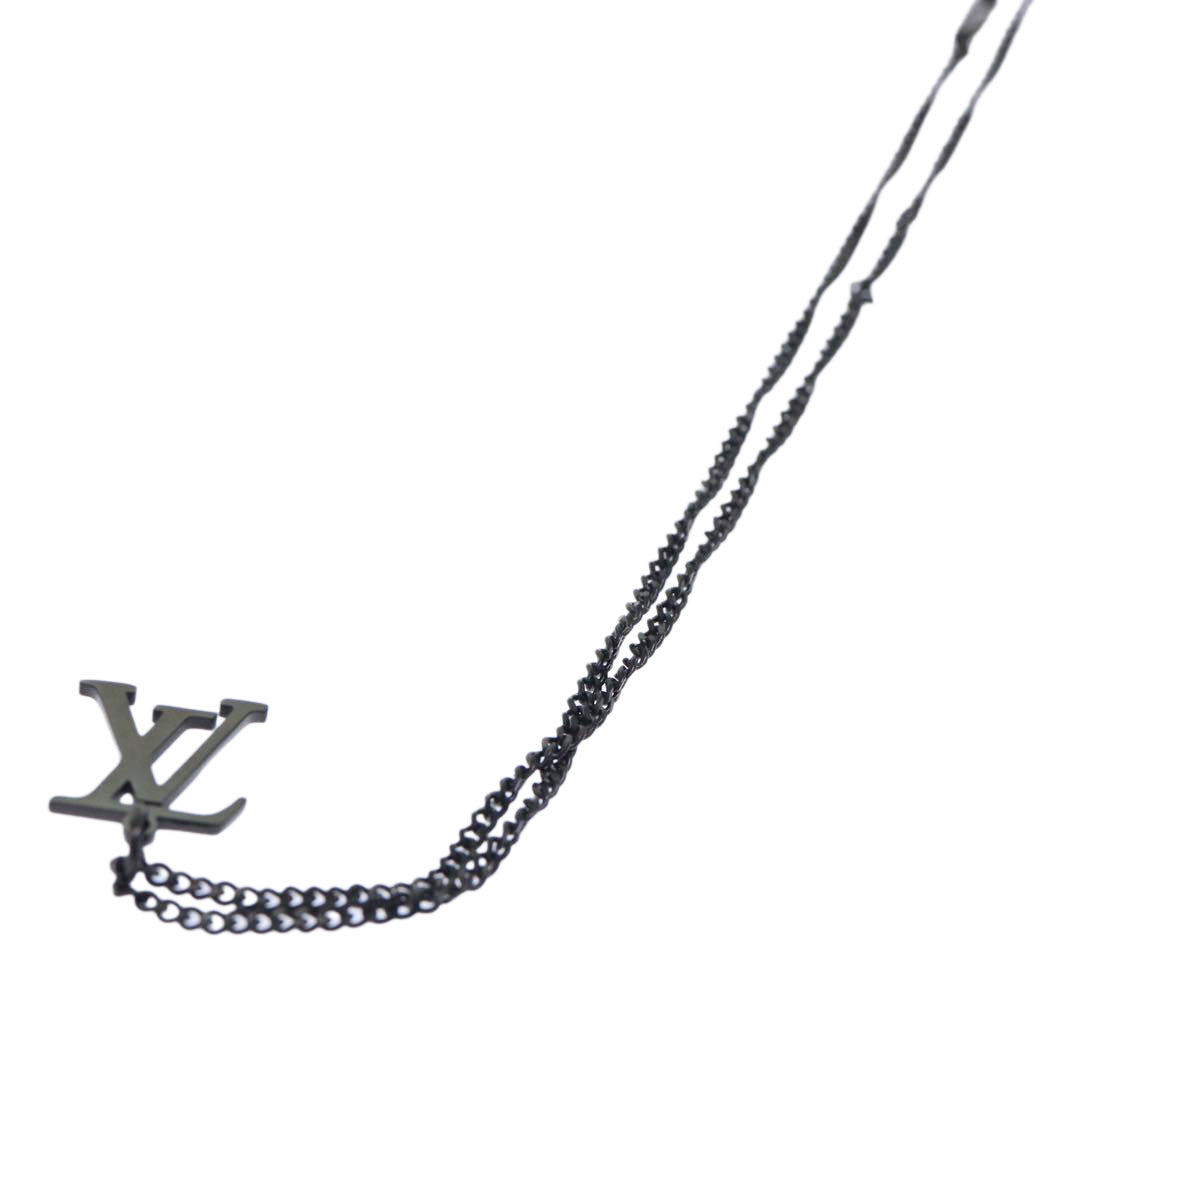 Louis Vuitton Women's Black Metal Necklace with Iconic Design in Black